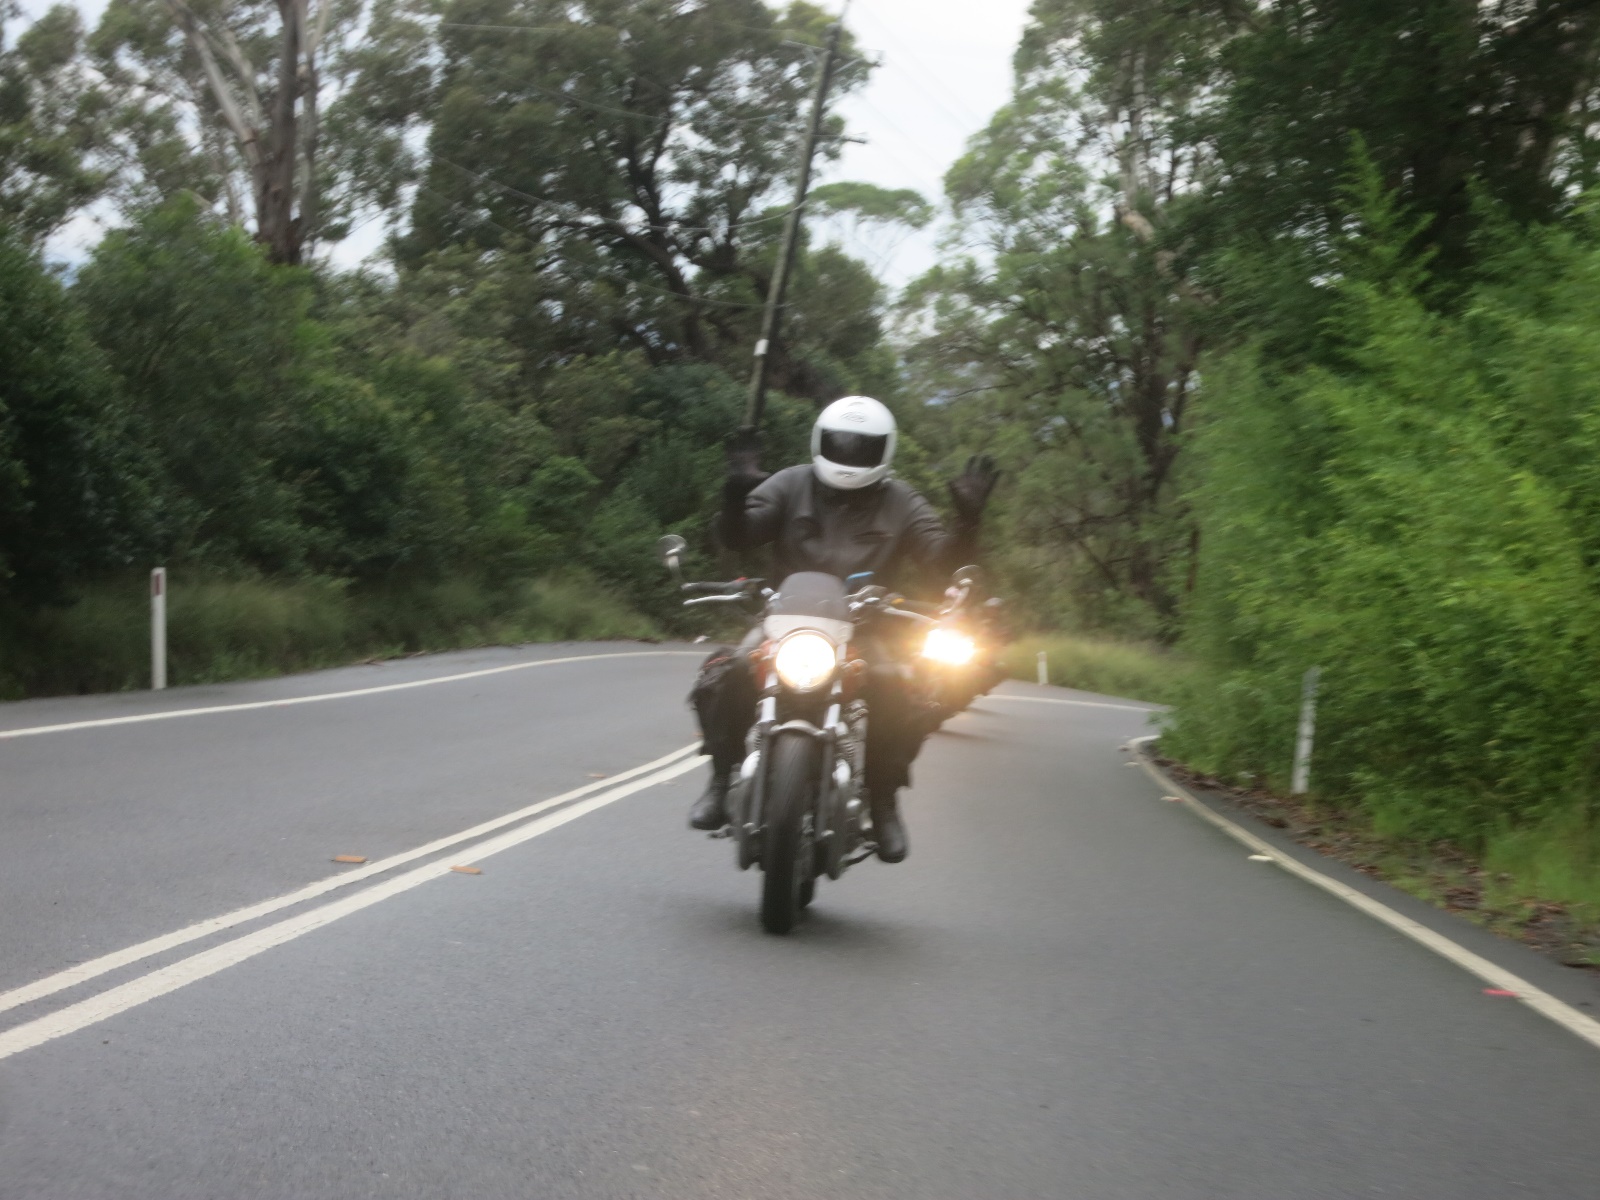 A person riding a motorcycle down the road

Description automatically generated with medium confidence